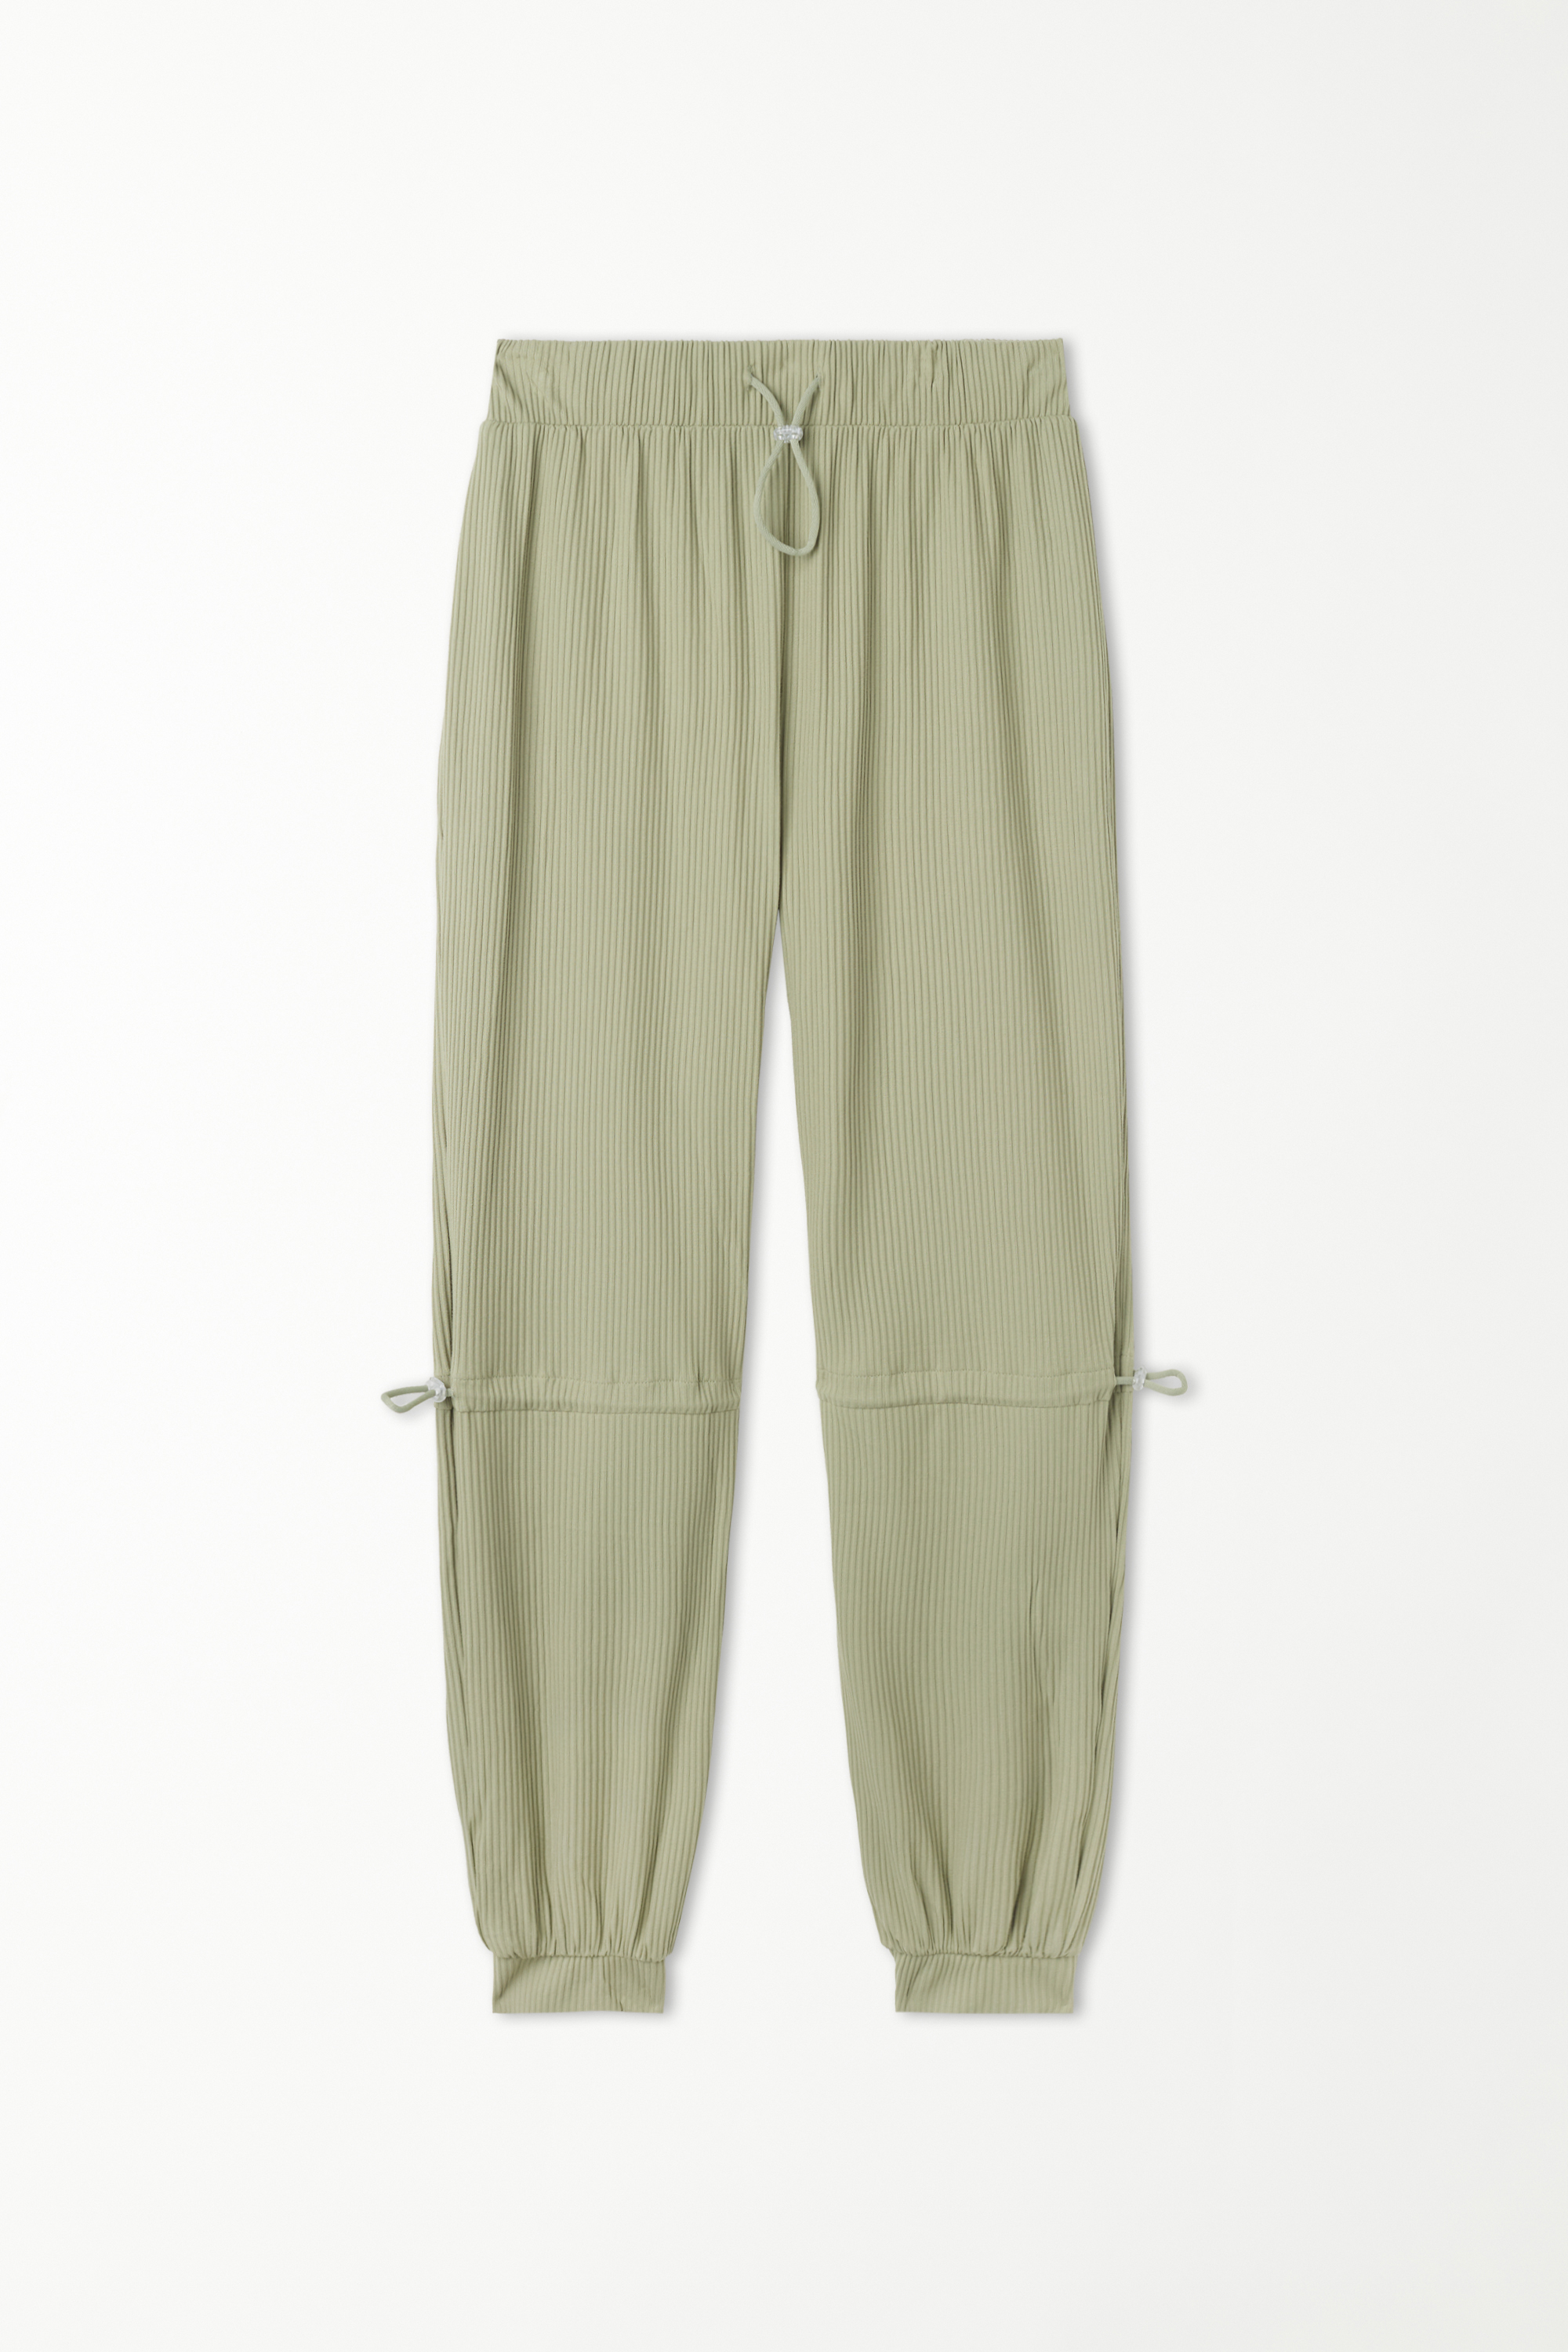 Ribbed Jogger with Adjustable Drawstrings